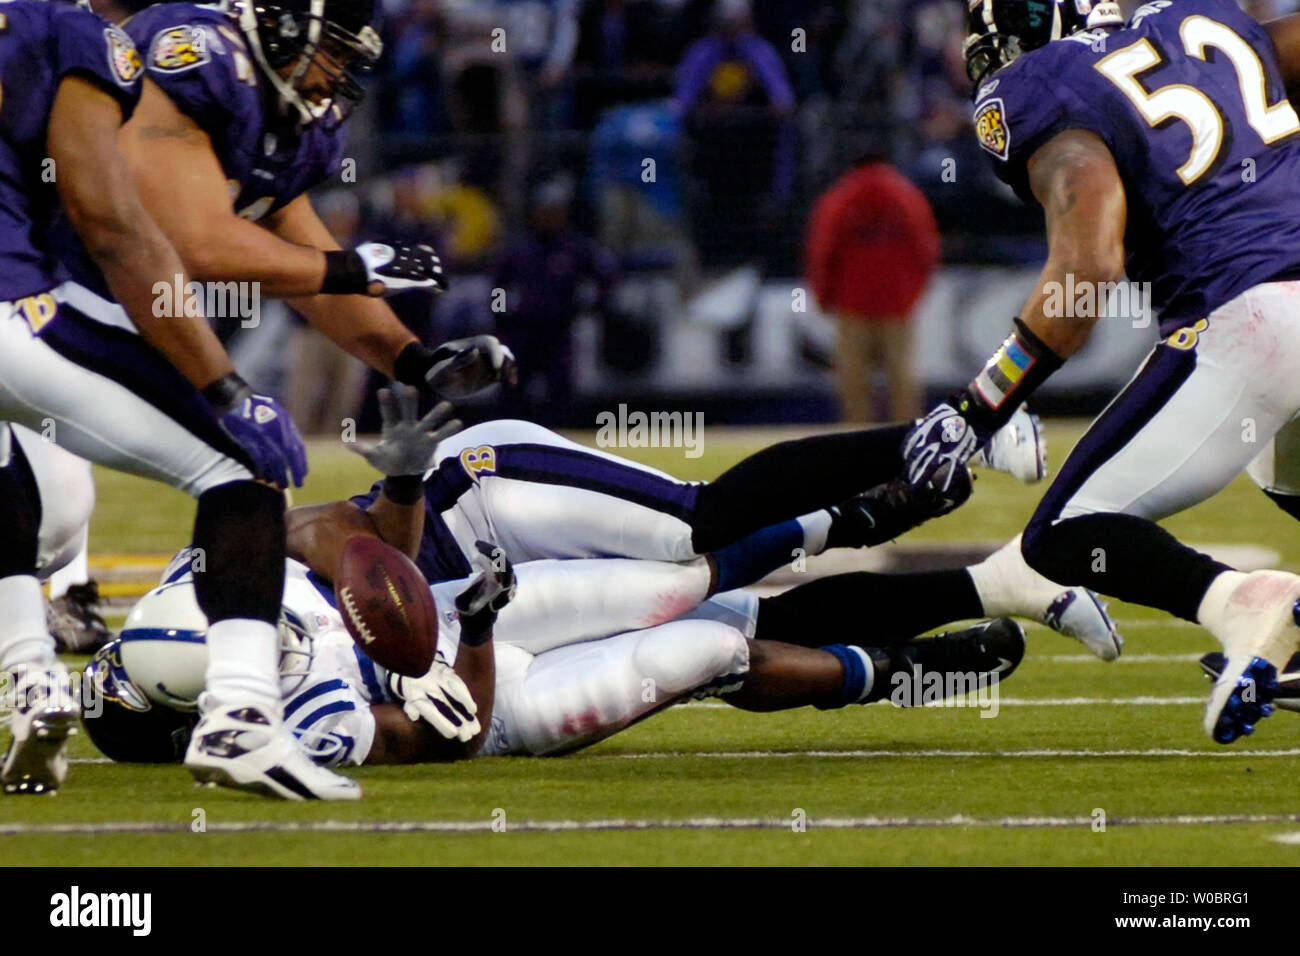 The Indianapolis Colts running back Joseph Addai (29) fumbles the ball in the third quarter against the Baltimore Ravens on January 13, 2007 in the divisional round of the AFC playoffs at M&T Bank Stadium in Baltimore, Maryland.  Indianapolis Colts wide receiver Aaron Moorehead recovered the ball as the Colts defeated the Ravens 15-6 to advance to the AFC championship game.  (UPI Photo/ Mark Goldman) Stock Photo